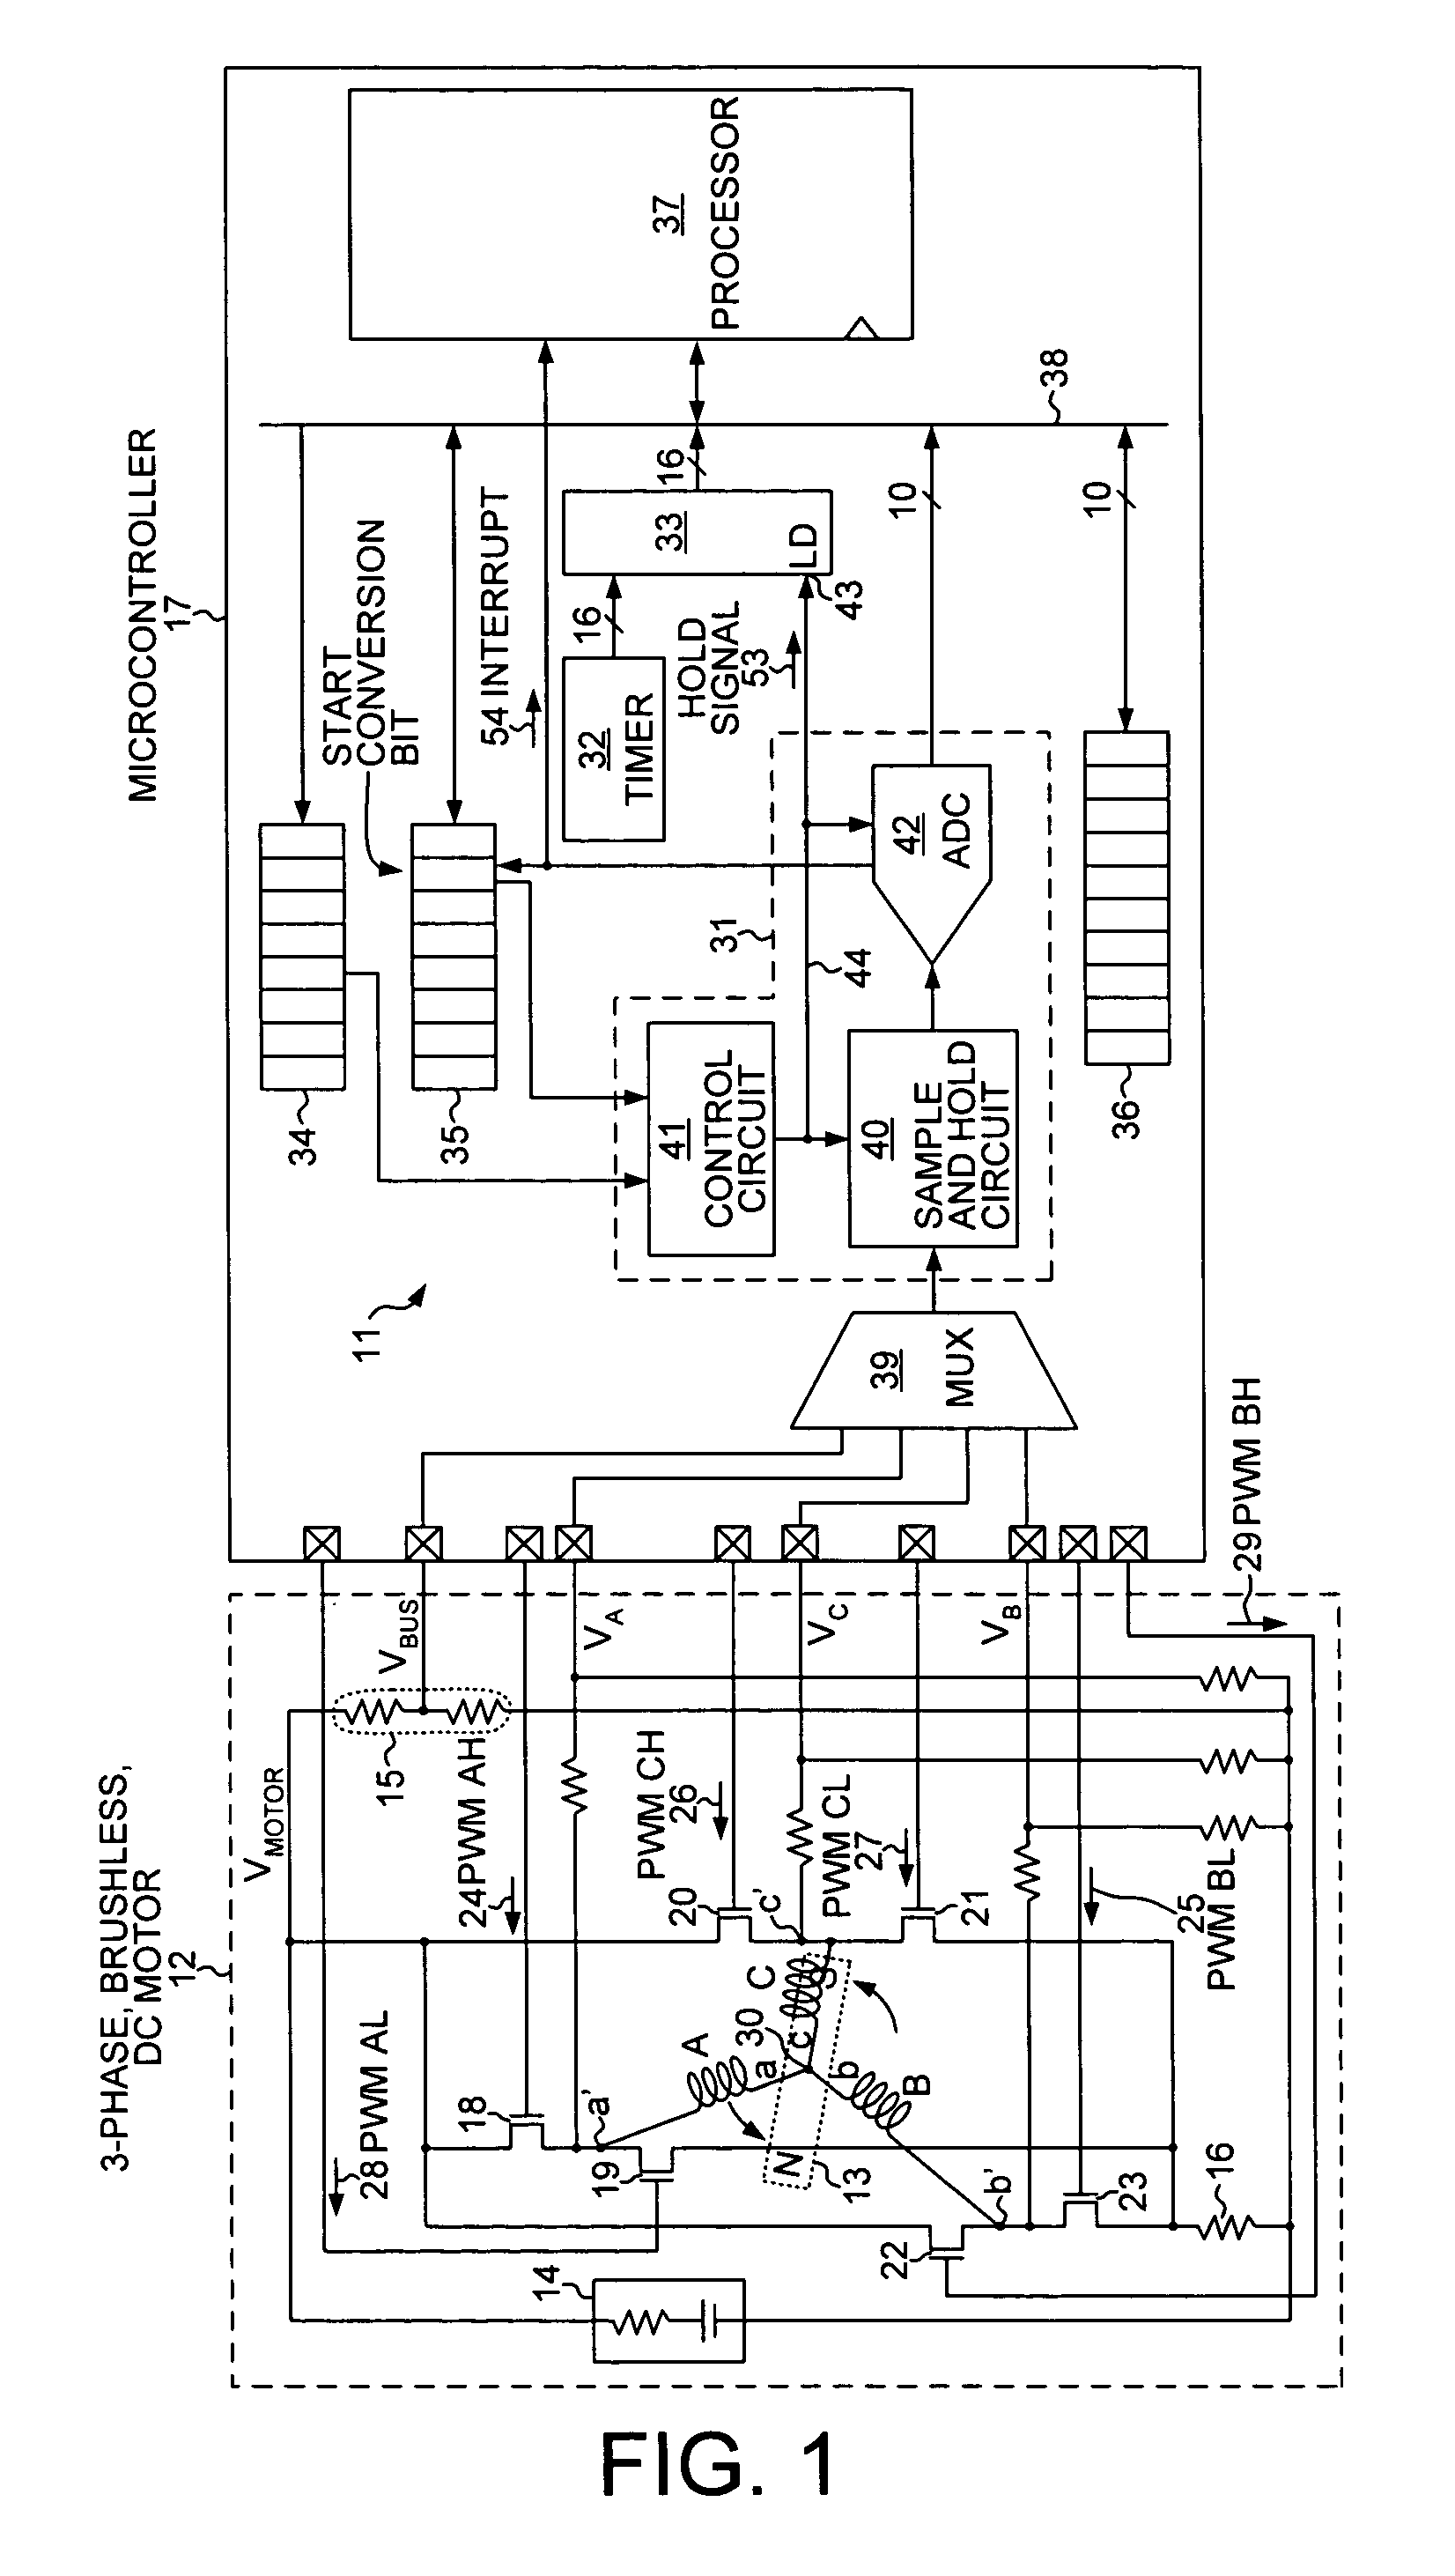 Sample and hold time stamp for sensing zero crossing of back electromotive force in 3-phase brushless DC motors